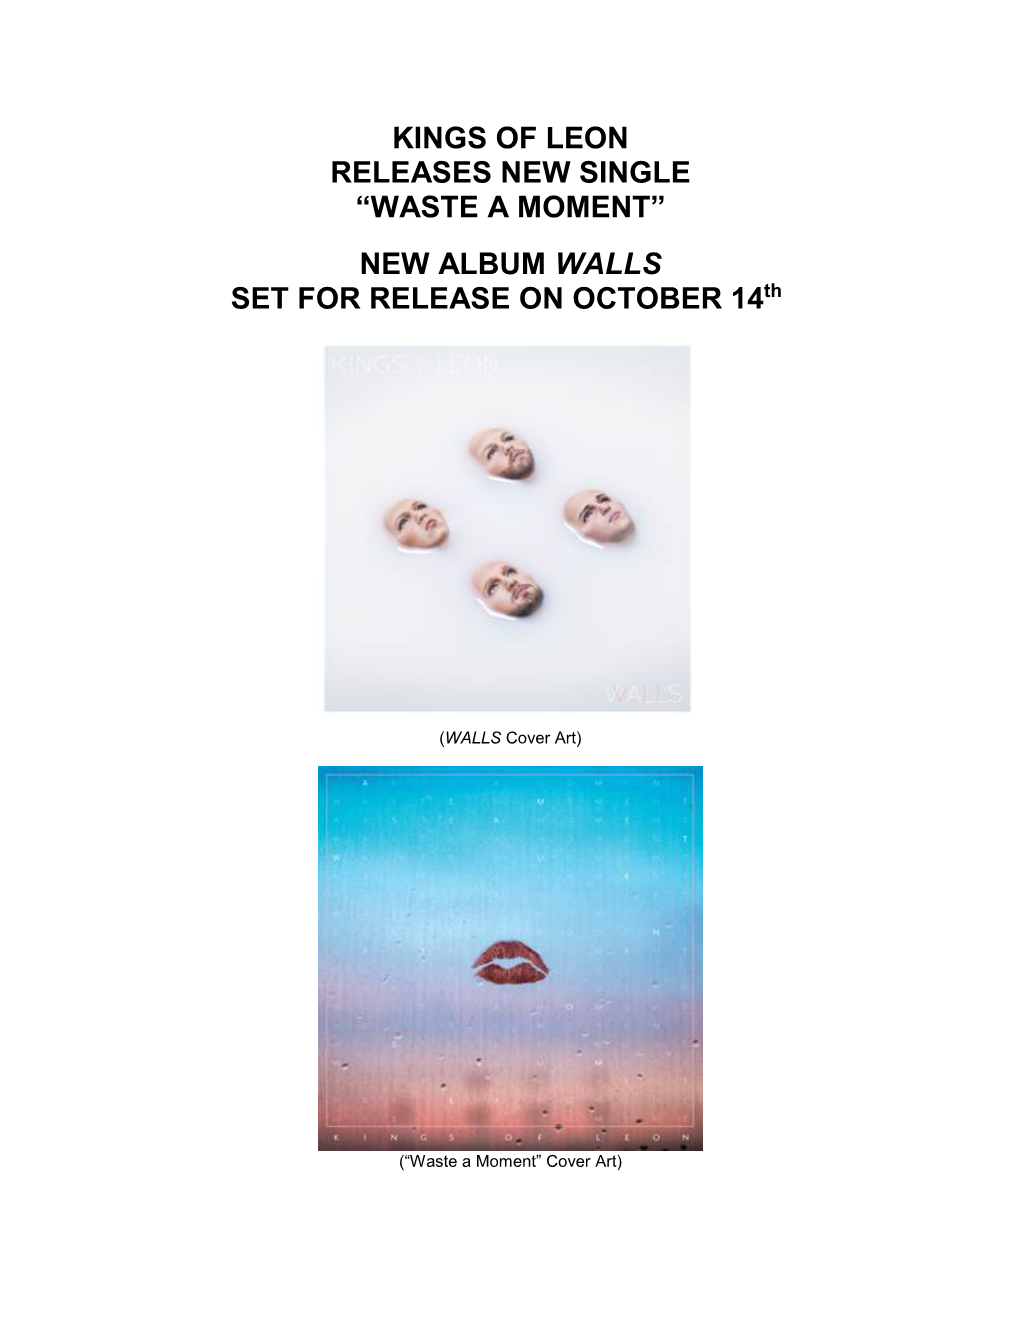 Kings of Leon Releases New Single “Waste a Moment” New